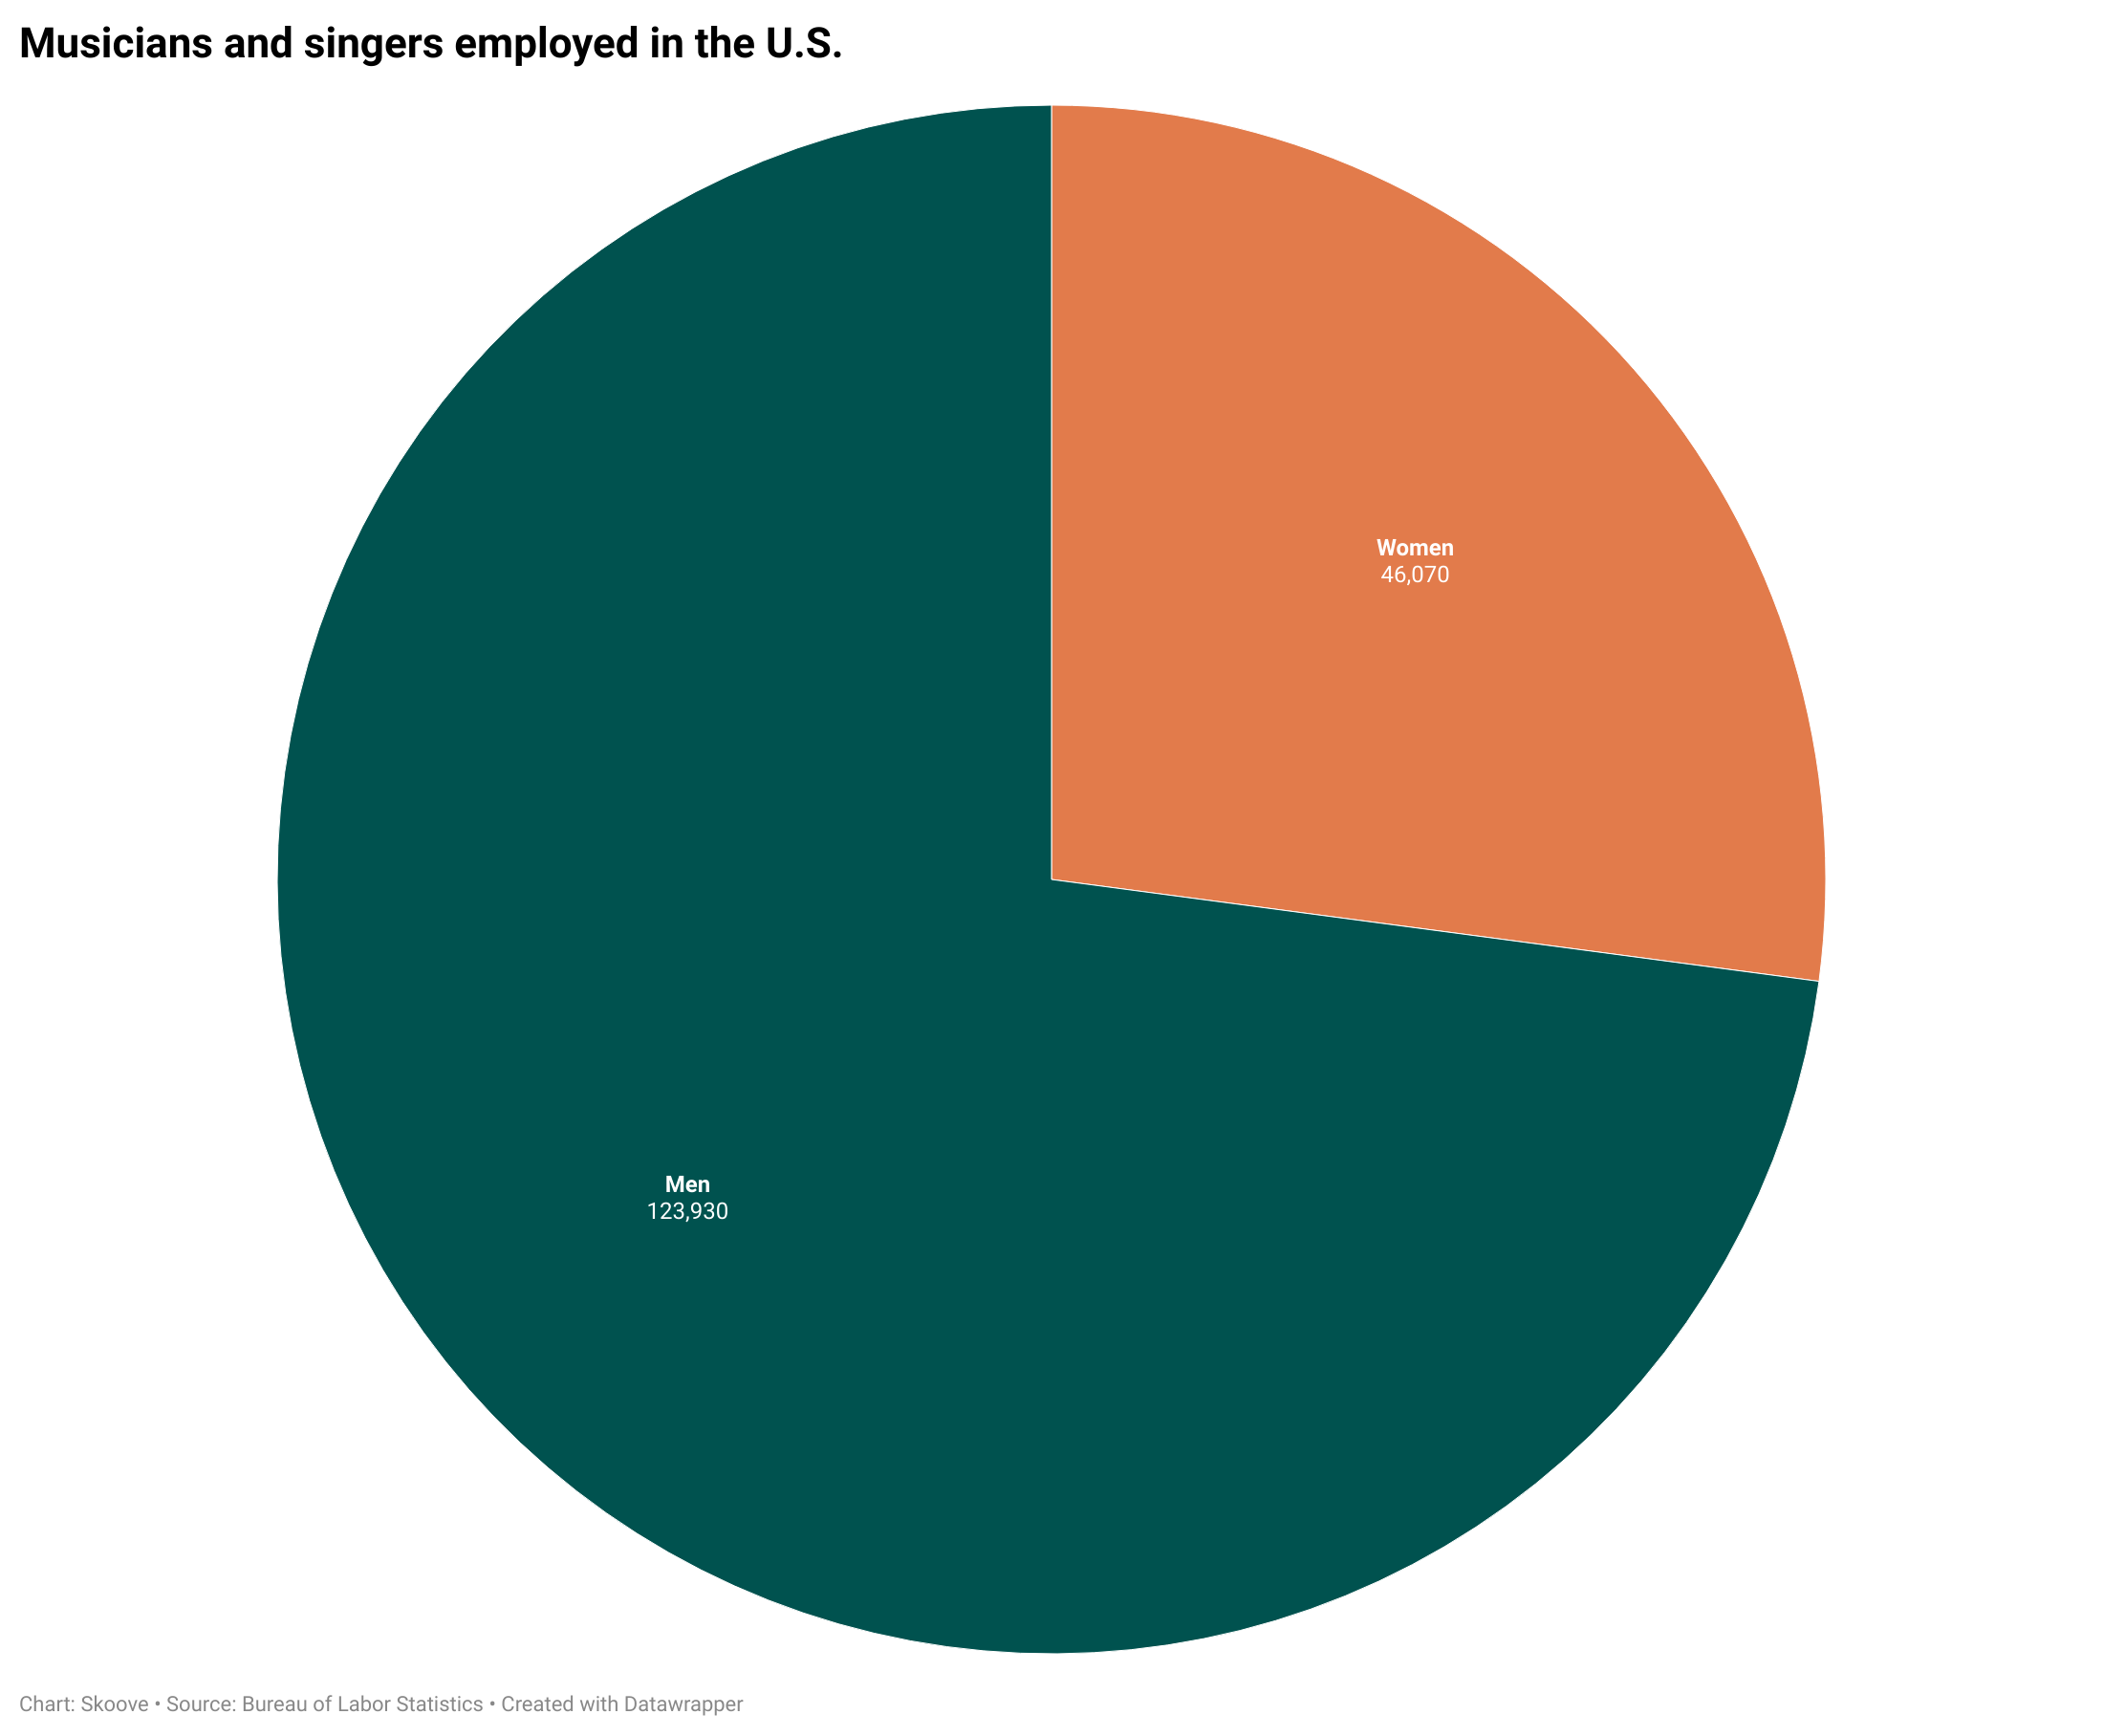 Pie chart on employed musicians in the U.S.